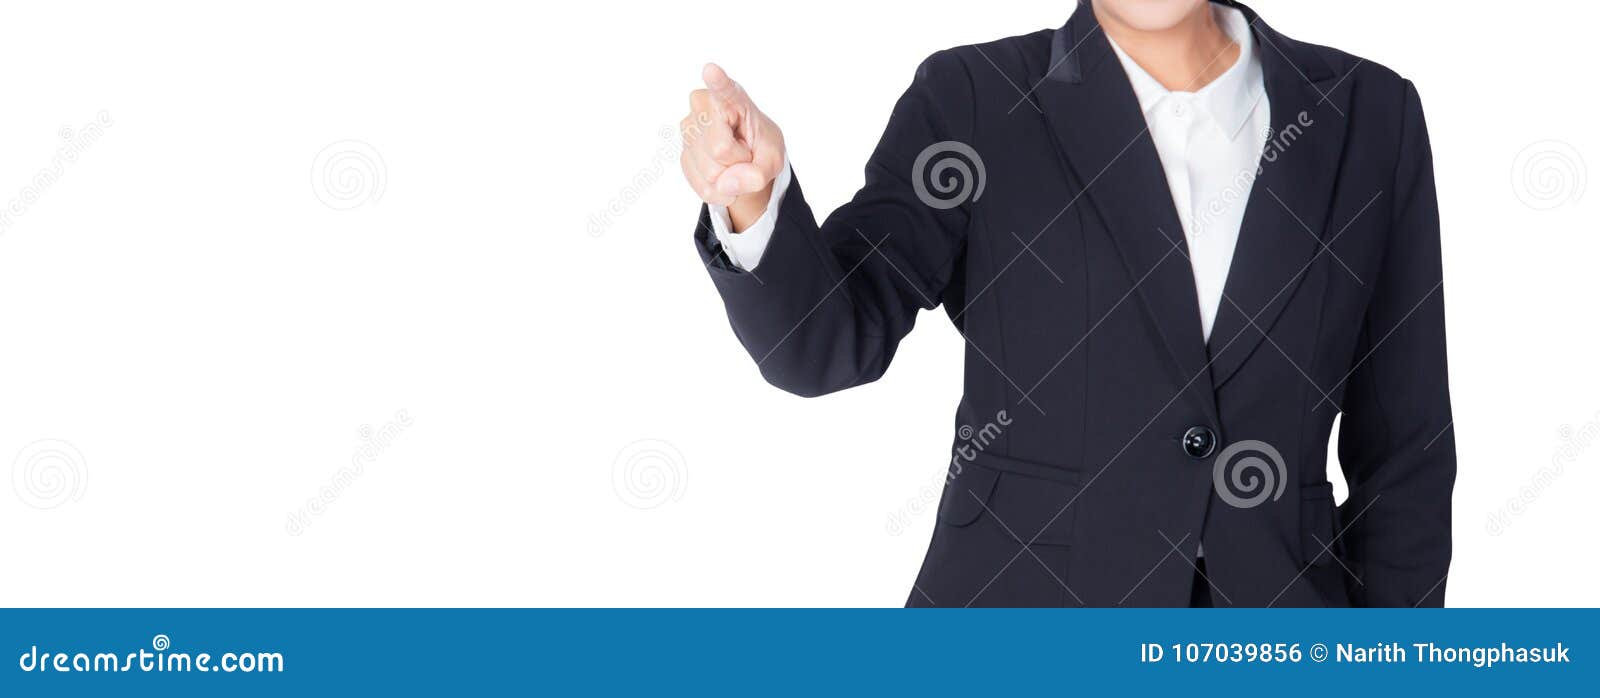 young buisness woman with finger point up on white background